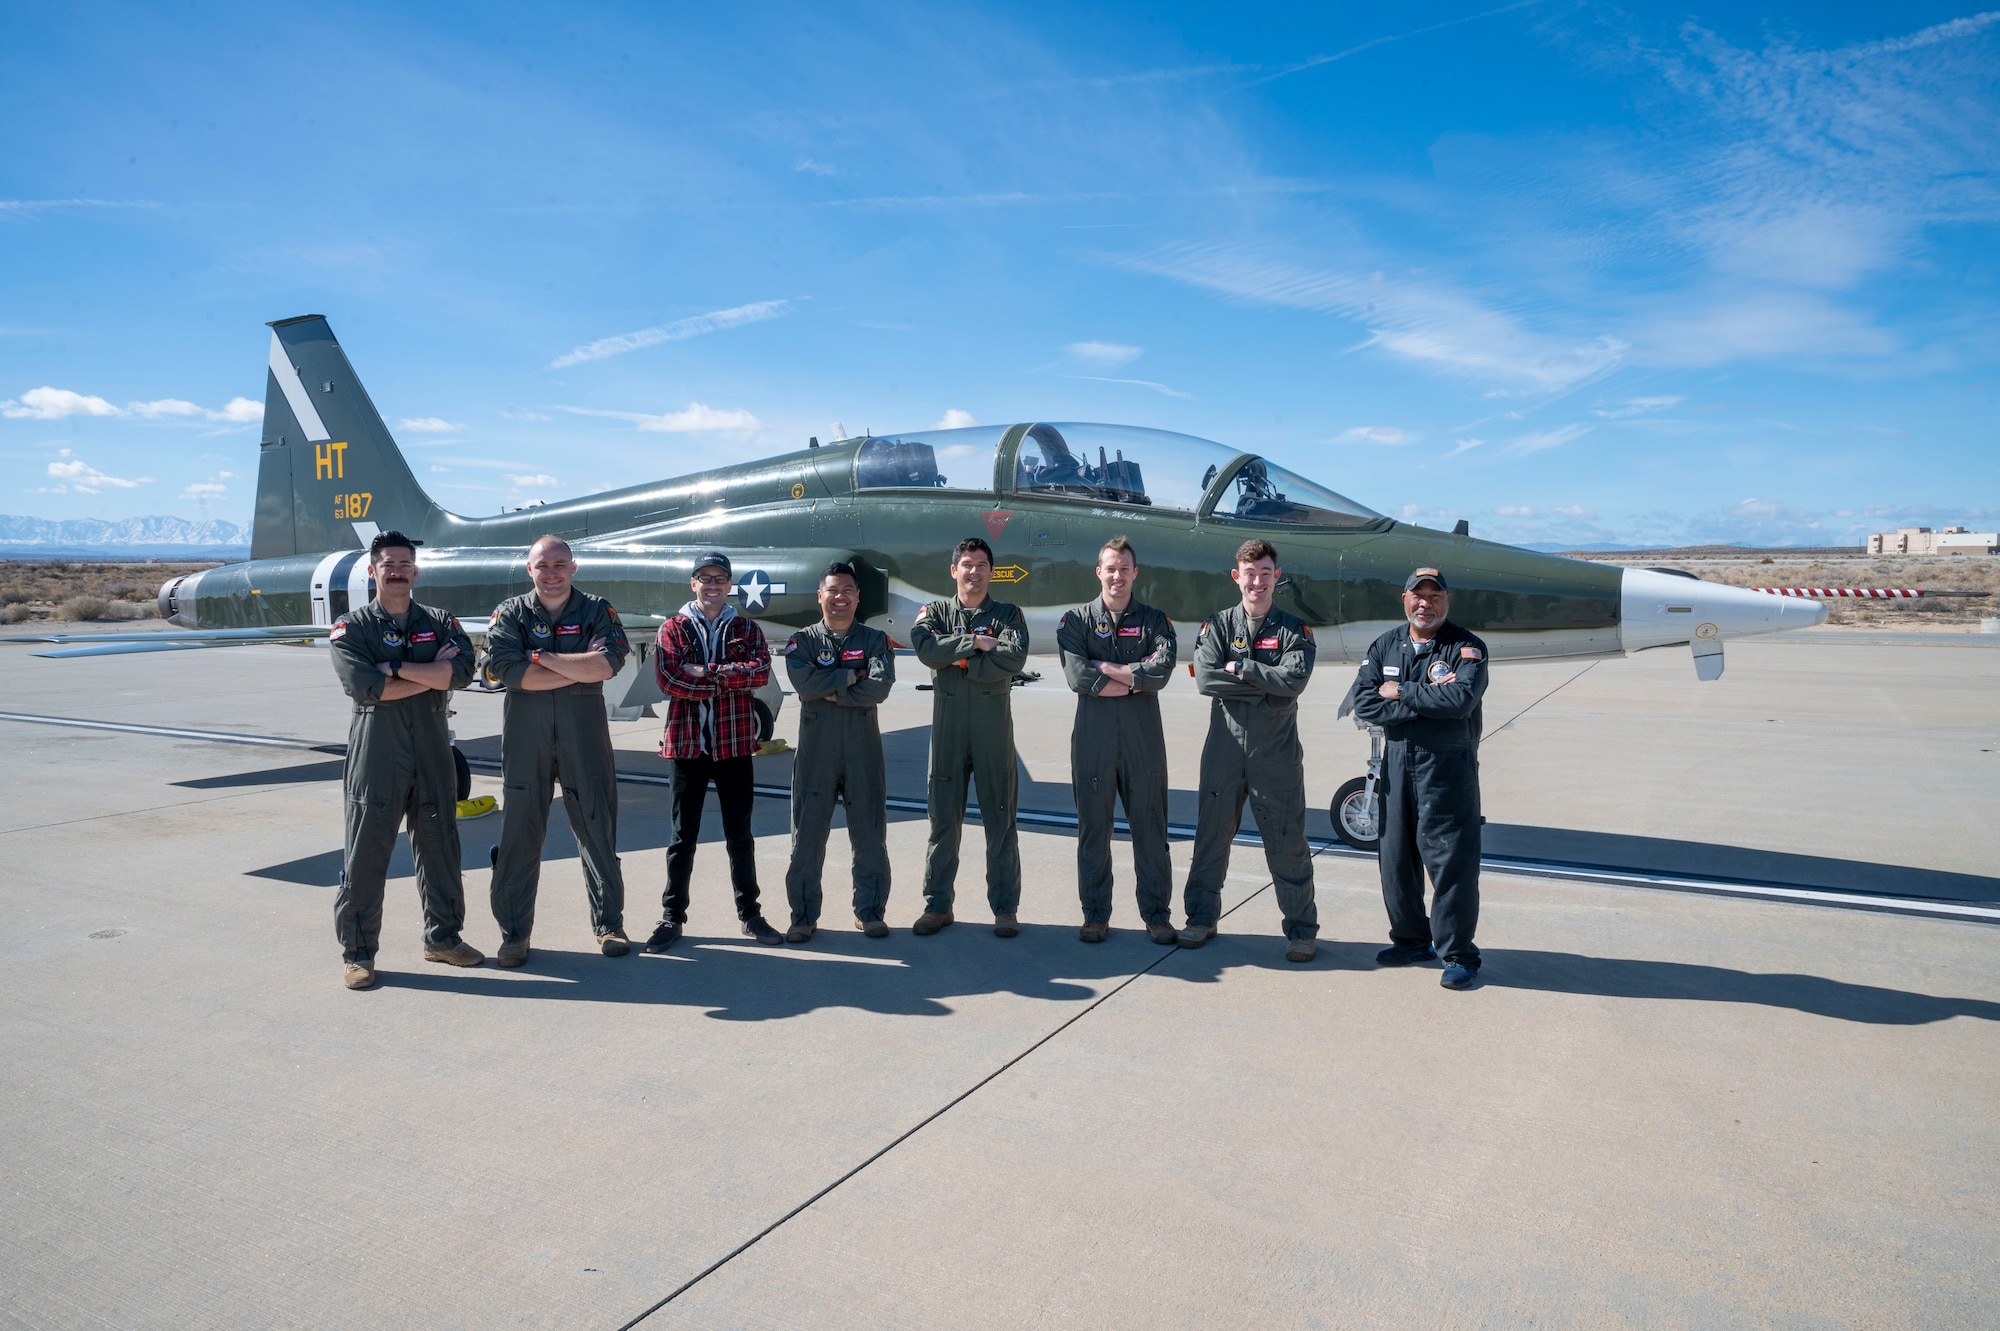 The "Have 5tarboy" team poses for a photo in front of a T-38C from Holloman. (Members from left to right: Capt. Steve "Nike" O'Briant, Project Pilot, Capt. Nathan "Loball" Raquet, Project Lead/Engineer, Joshua Morales, CEO of StarNav, Capt. Ajericho "Saint" Malia, Project Engineer, Squadron Leader Stephen "Tavo" Tavener Project Pilot (UK), Capt. Casey "Sandman" Slattery, Project Engineer, Maj. Matt "Doc" Daugherty, Project Pilot)